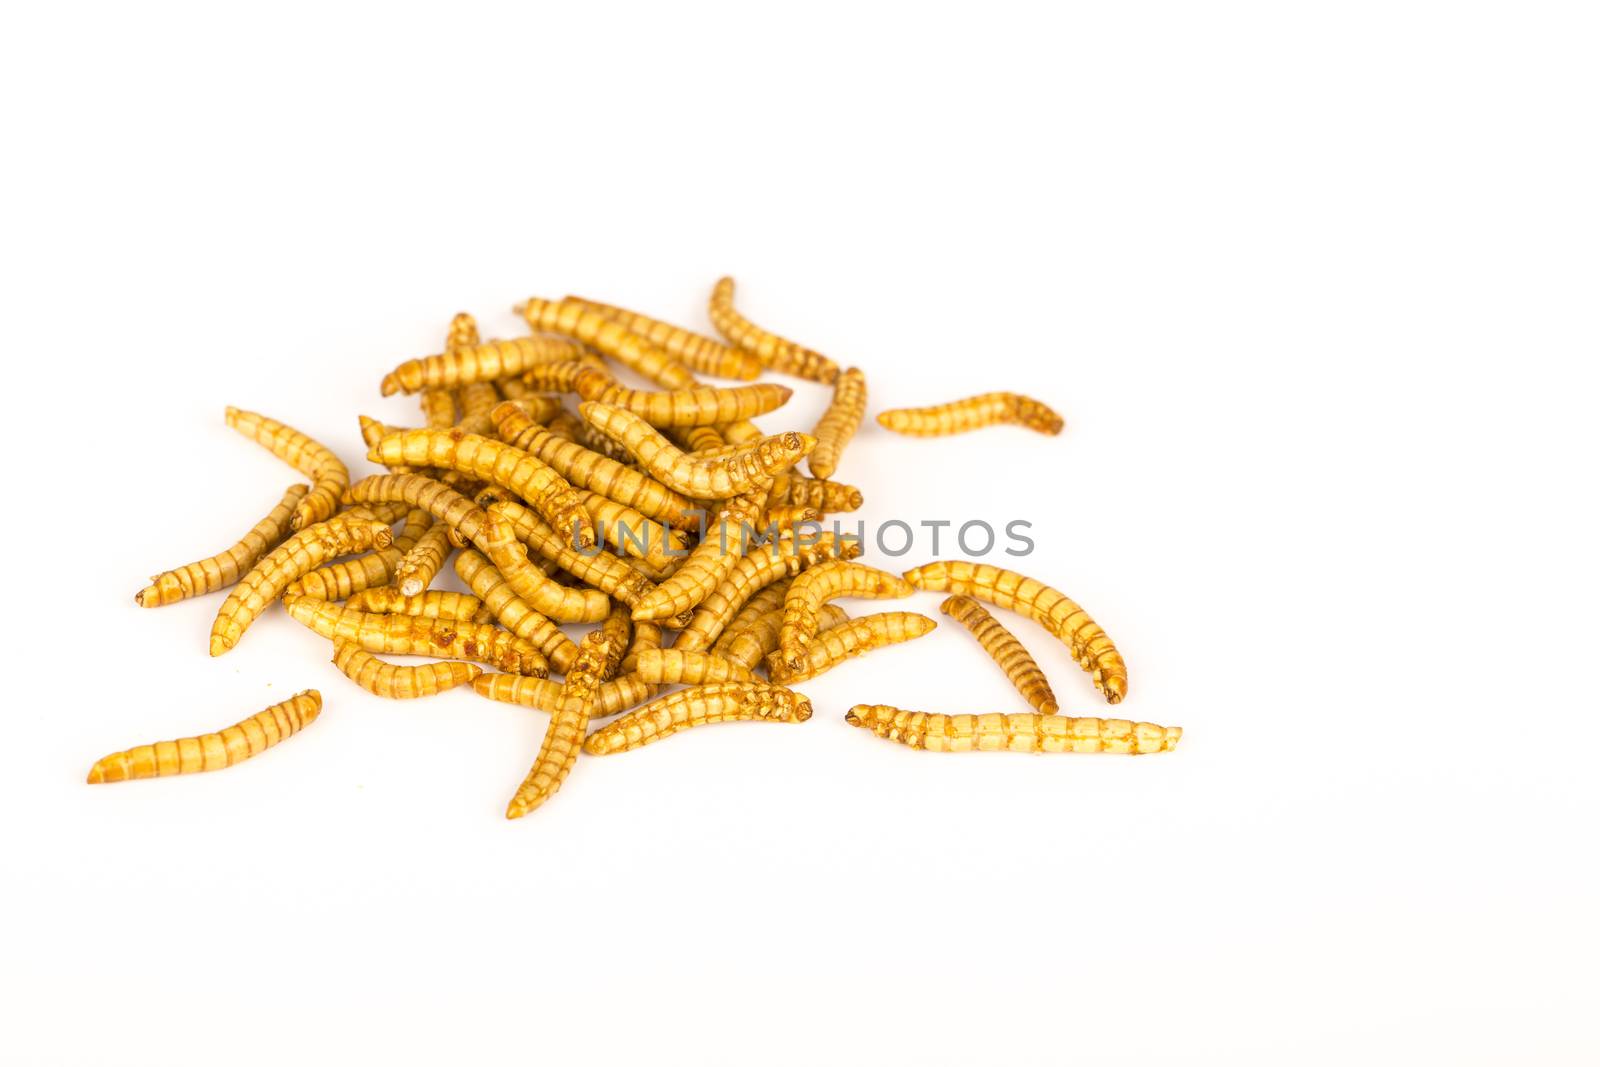 Fried insects Molitors, Protein rich food by CatherineL-Prod